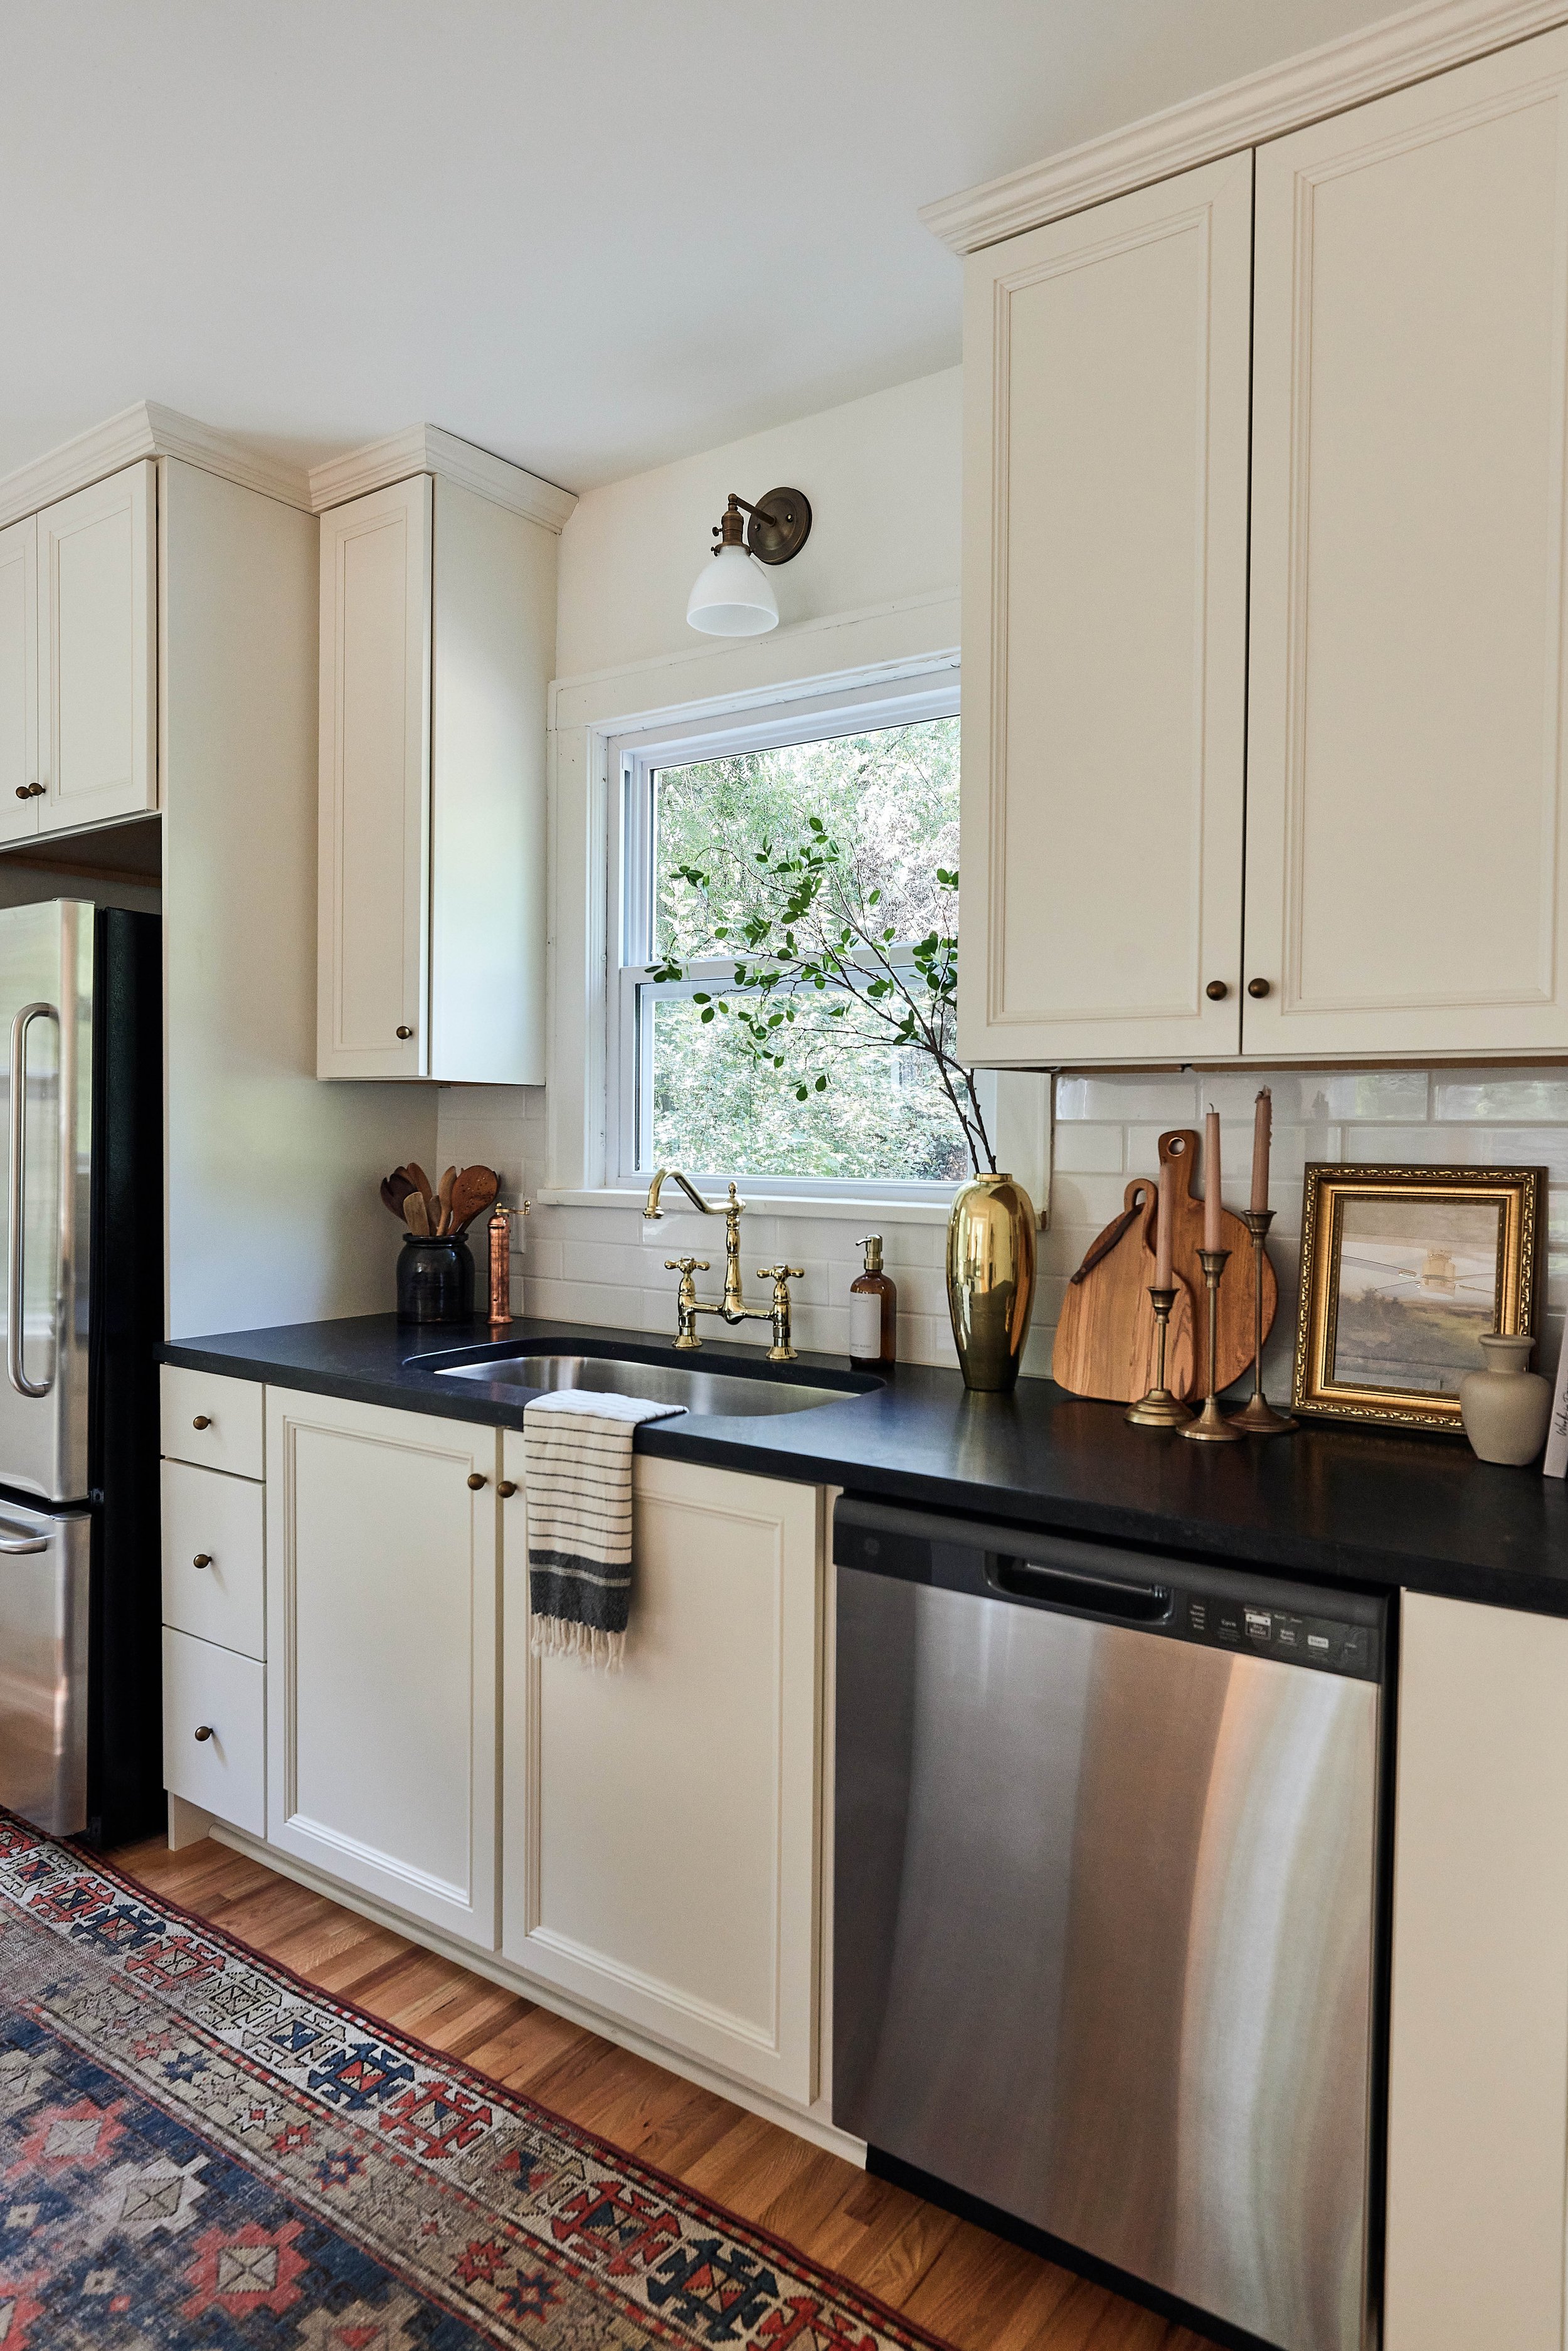 Our stucco farmhouse rental property renovation - kitchen layout & design reveal; cream cabinets and dark counters